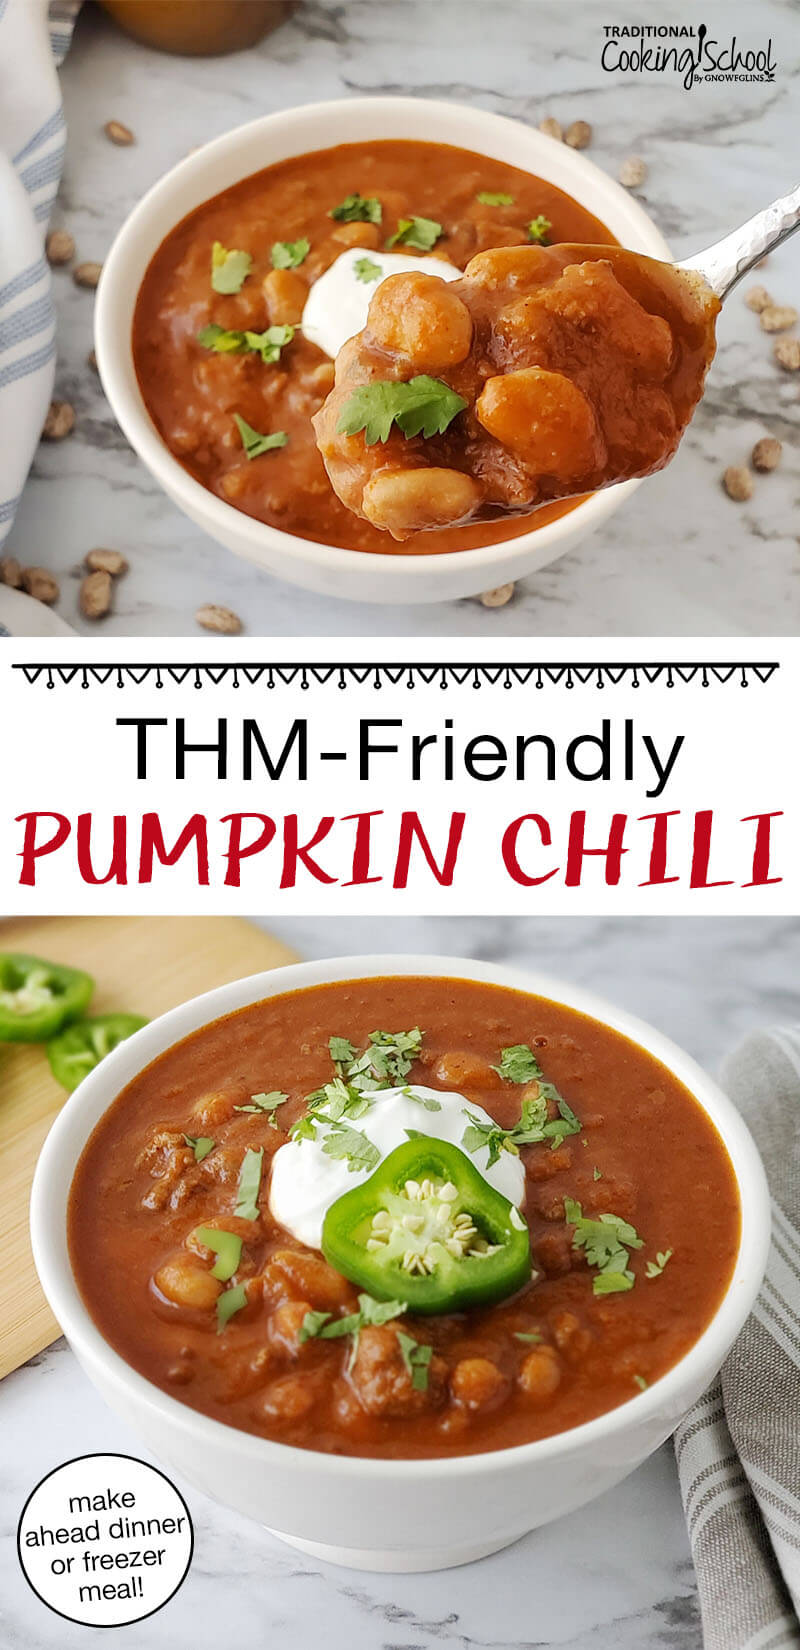 Photo collage of a spoonful of chili held up close to the camera, and a bowl of chili garnished with fresh herbs, sour cream, and a slice of pepper. Text overlay says: "THM-Friendly Pumpkin Chili (make ahead dinner or freezer meal!)"